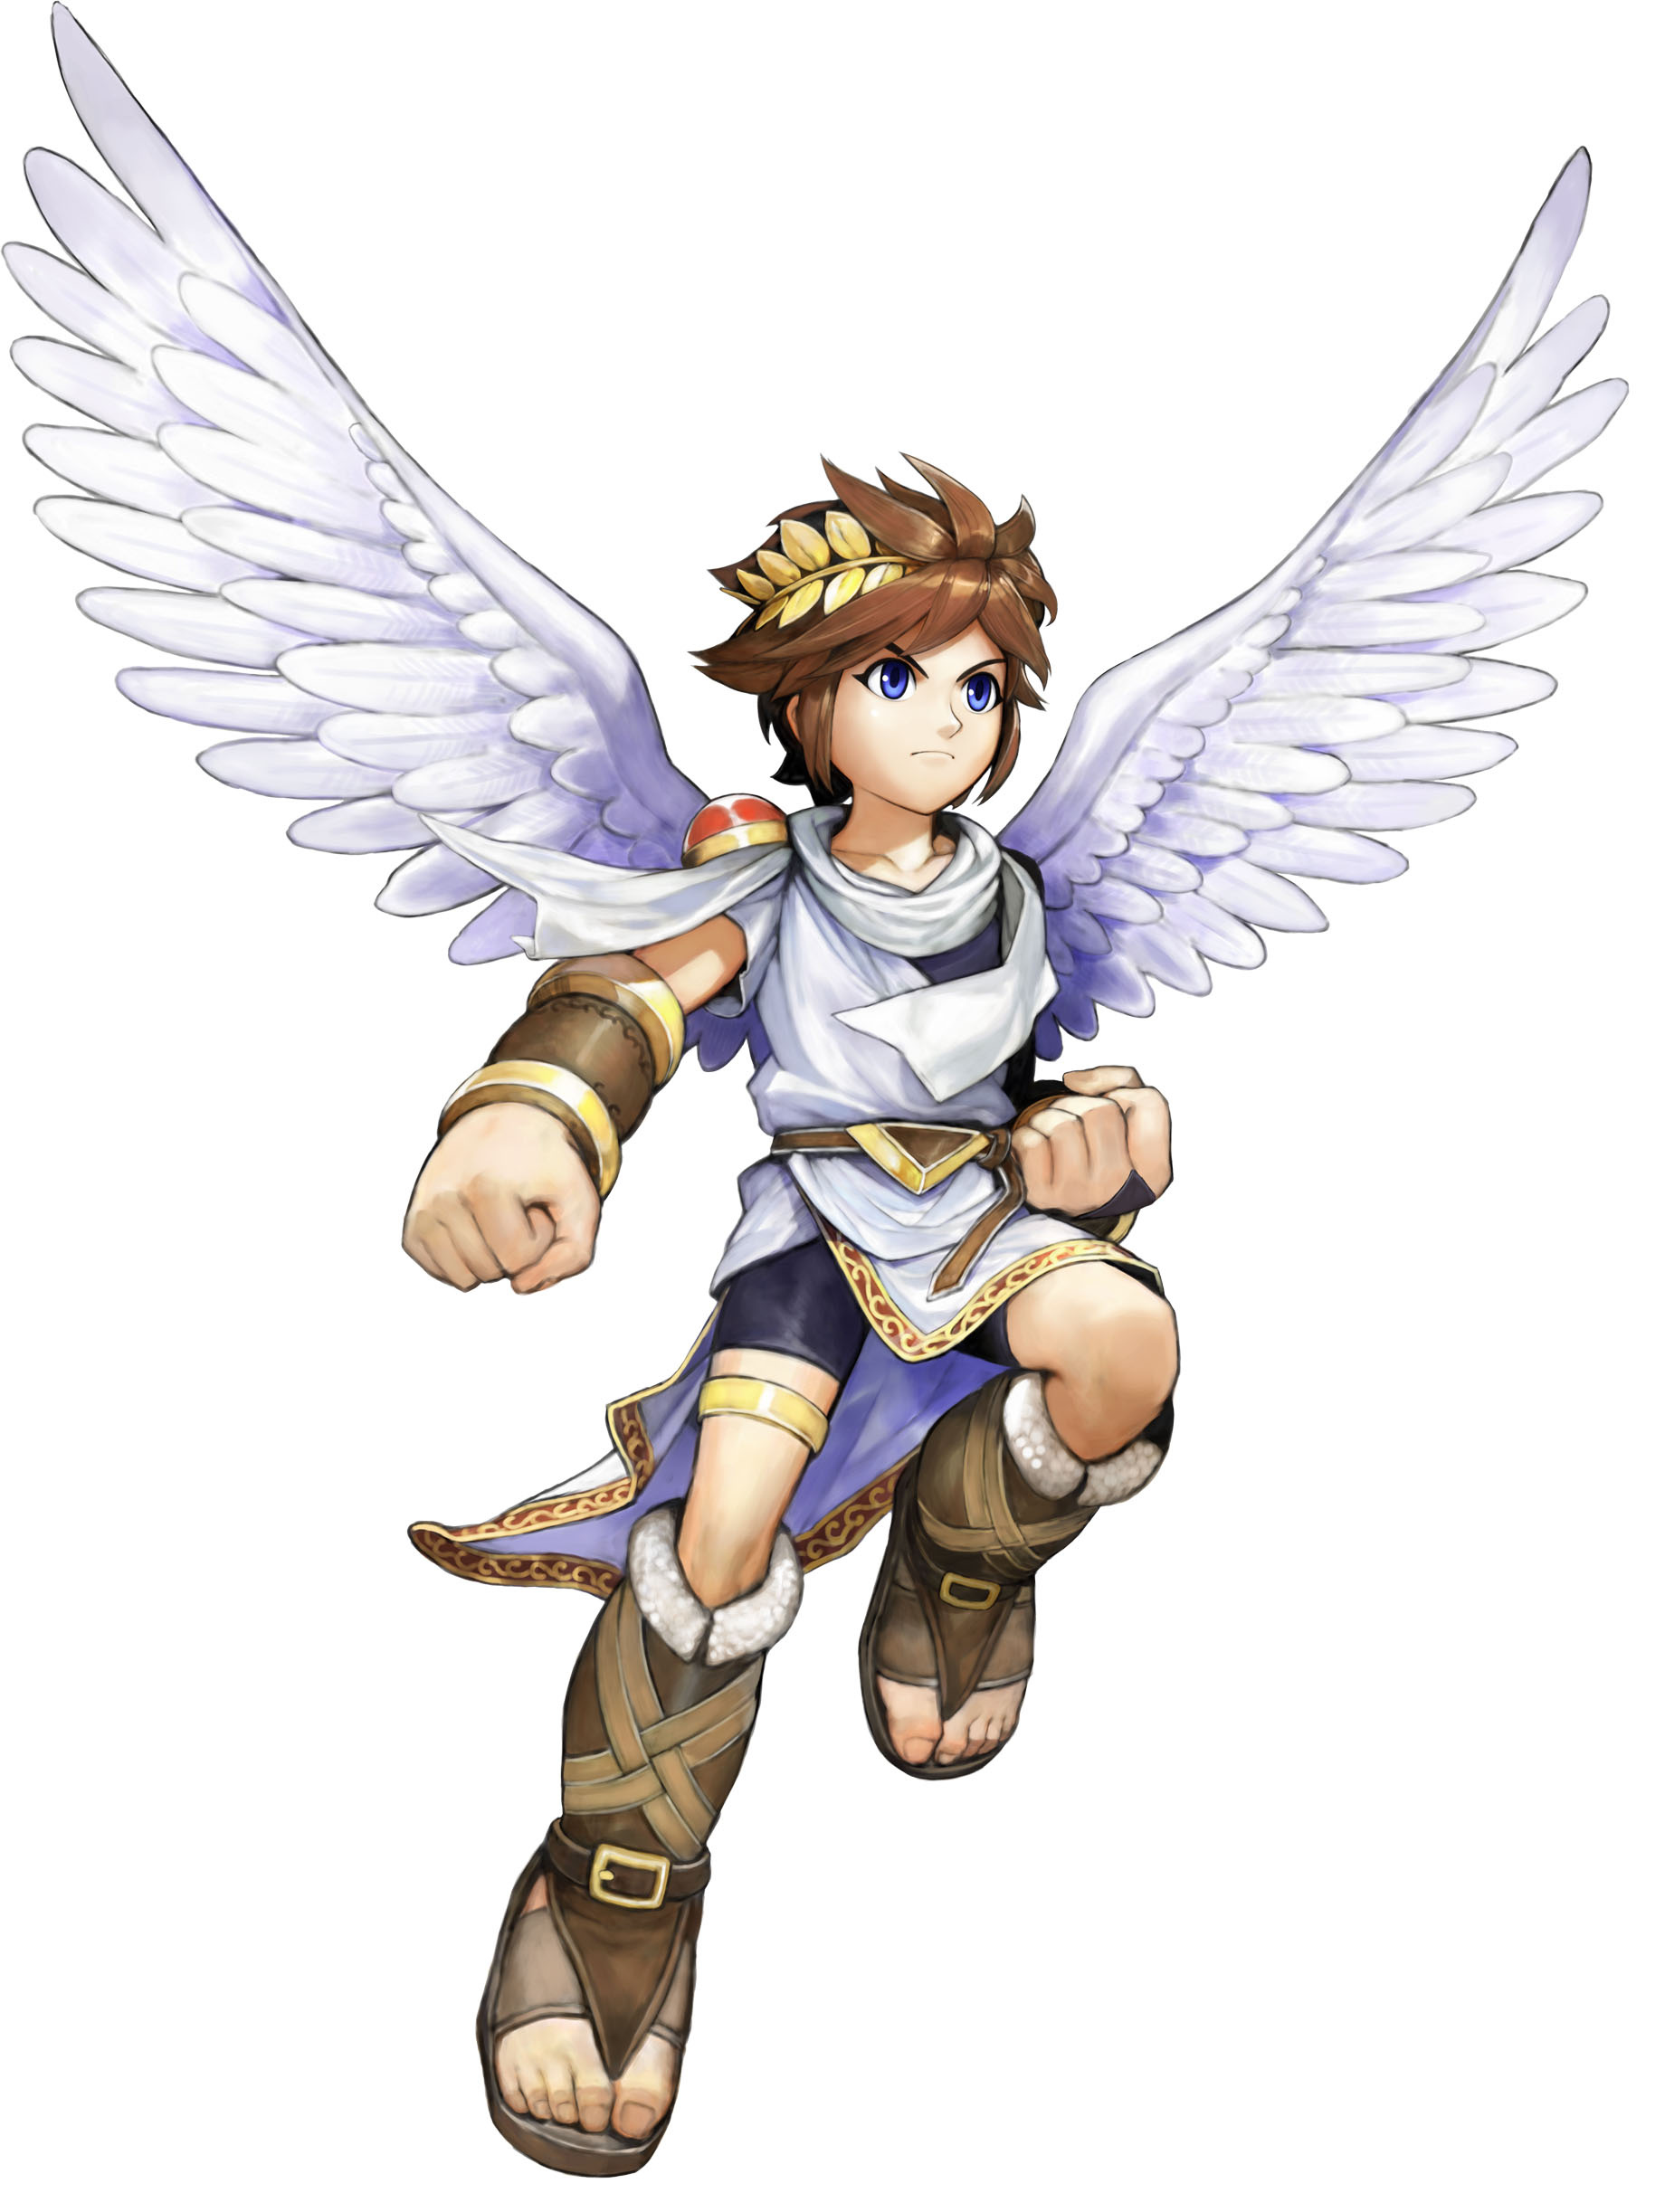 Pit from Kid Icarus, Heroic protagonist, Courageous warrior, Legendary quest, 1840x2450 HD Handy